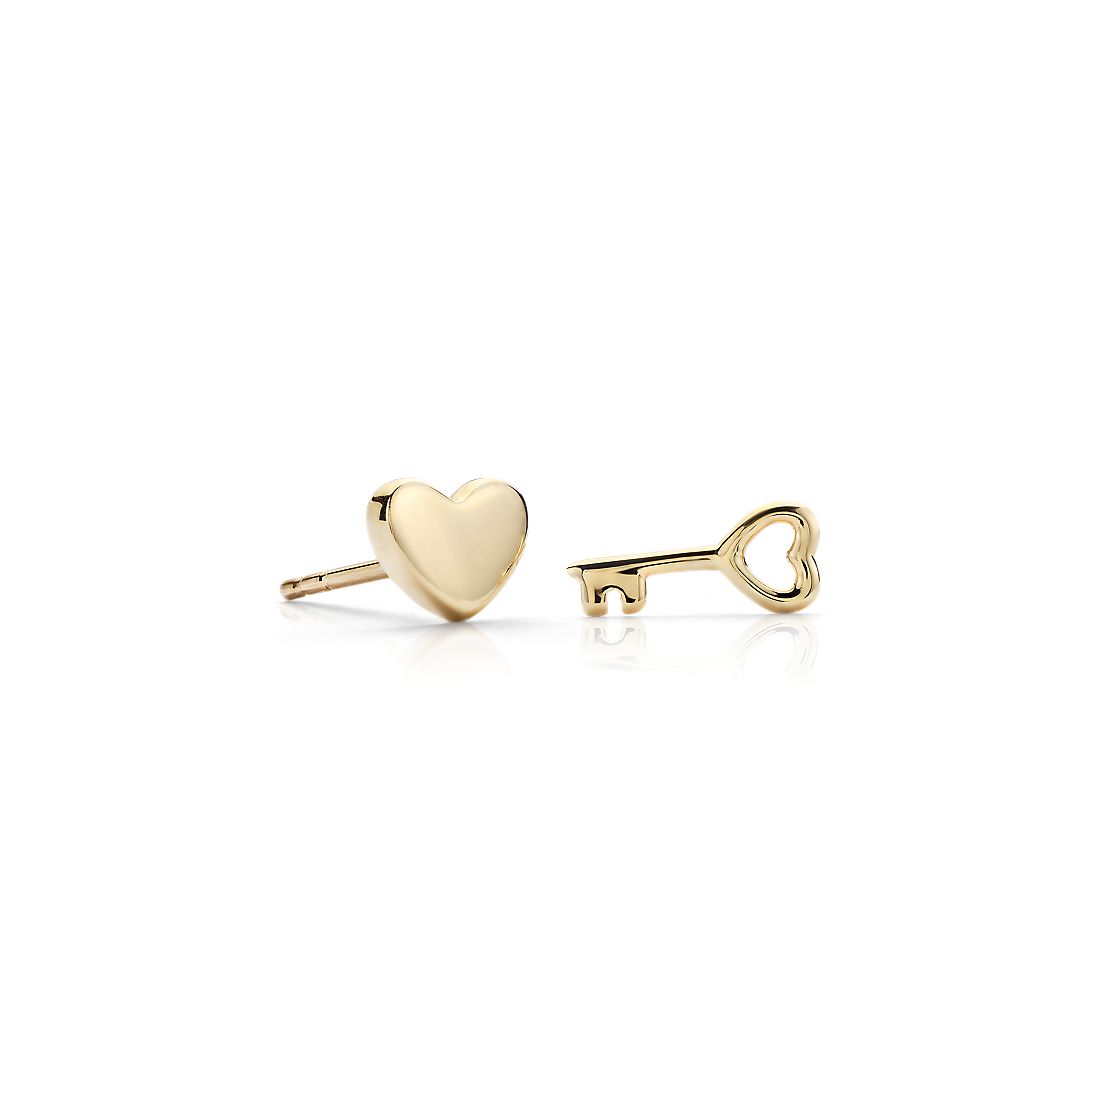 Heart and Key Mismatched Stud Earrings in 14k Yellow Gold 